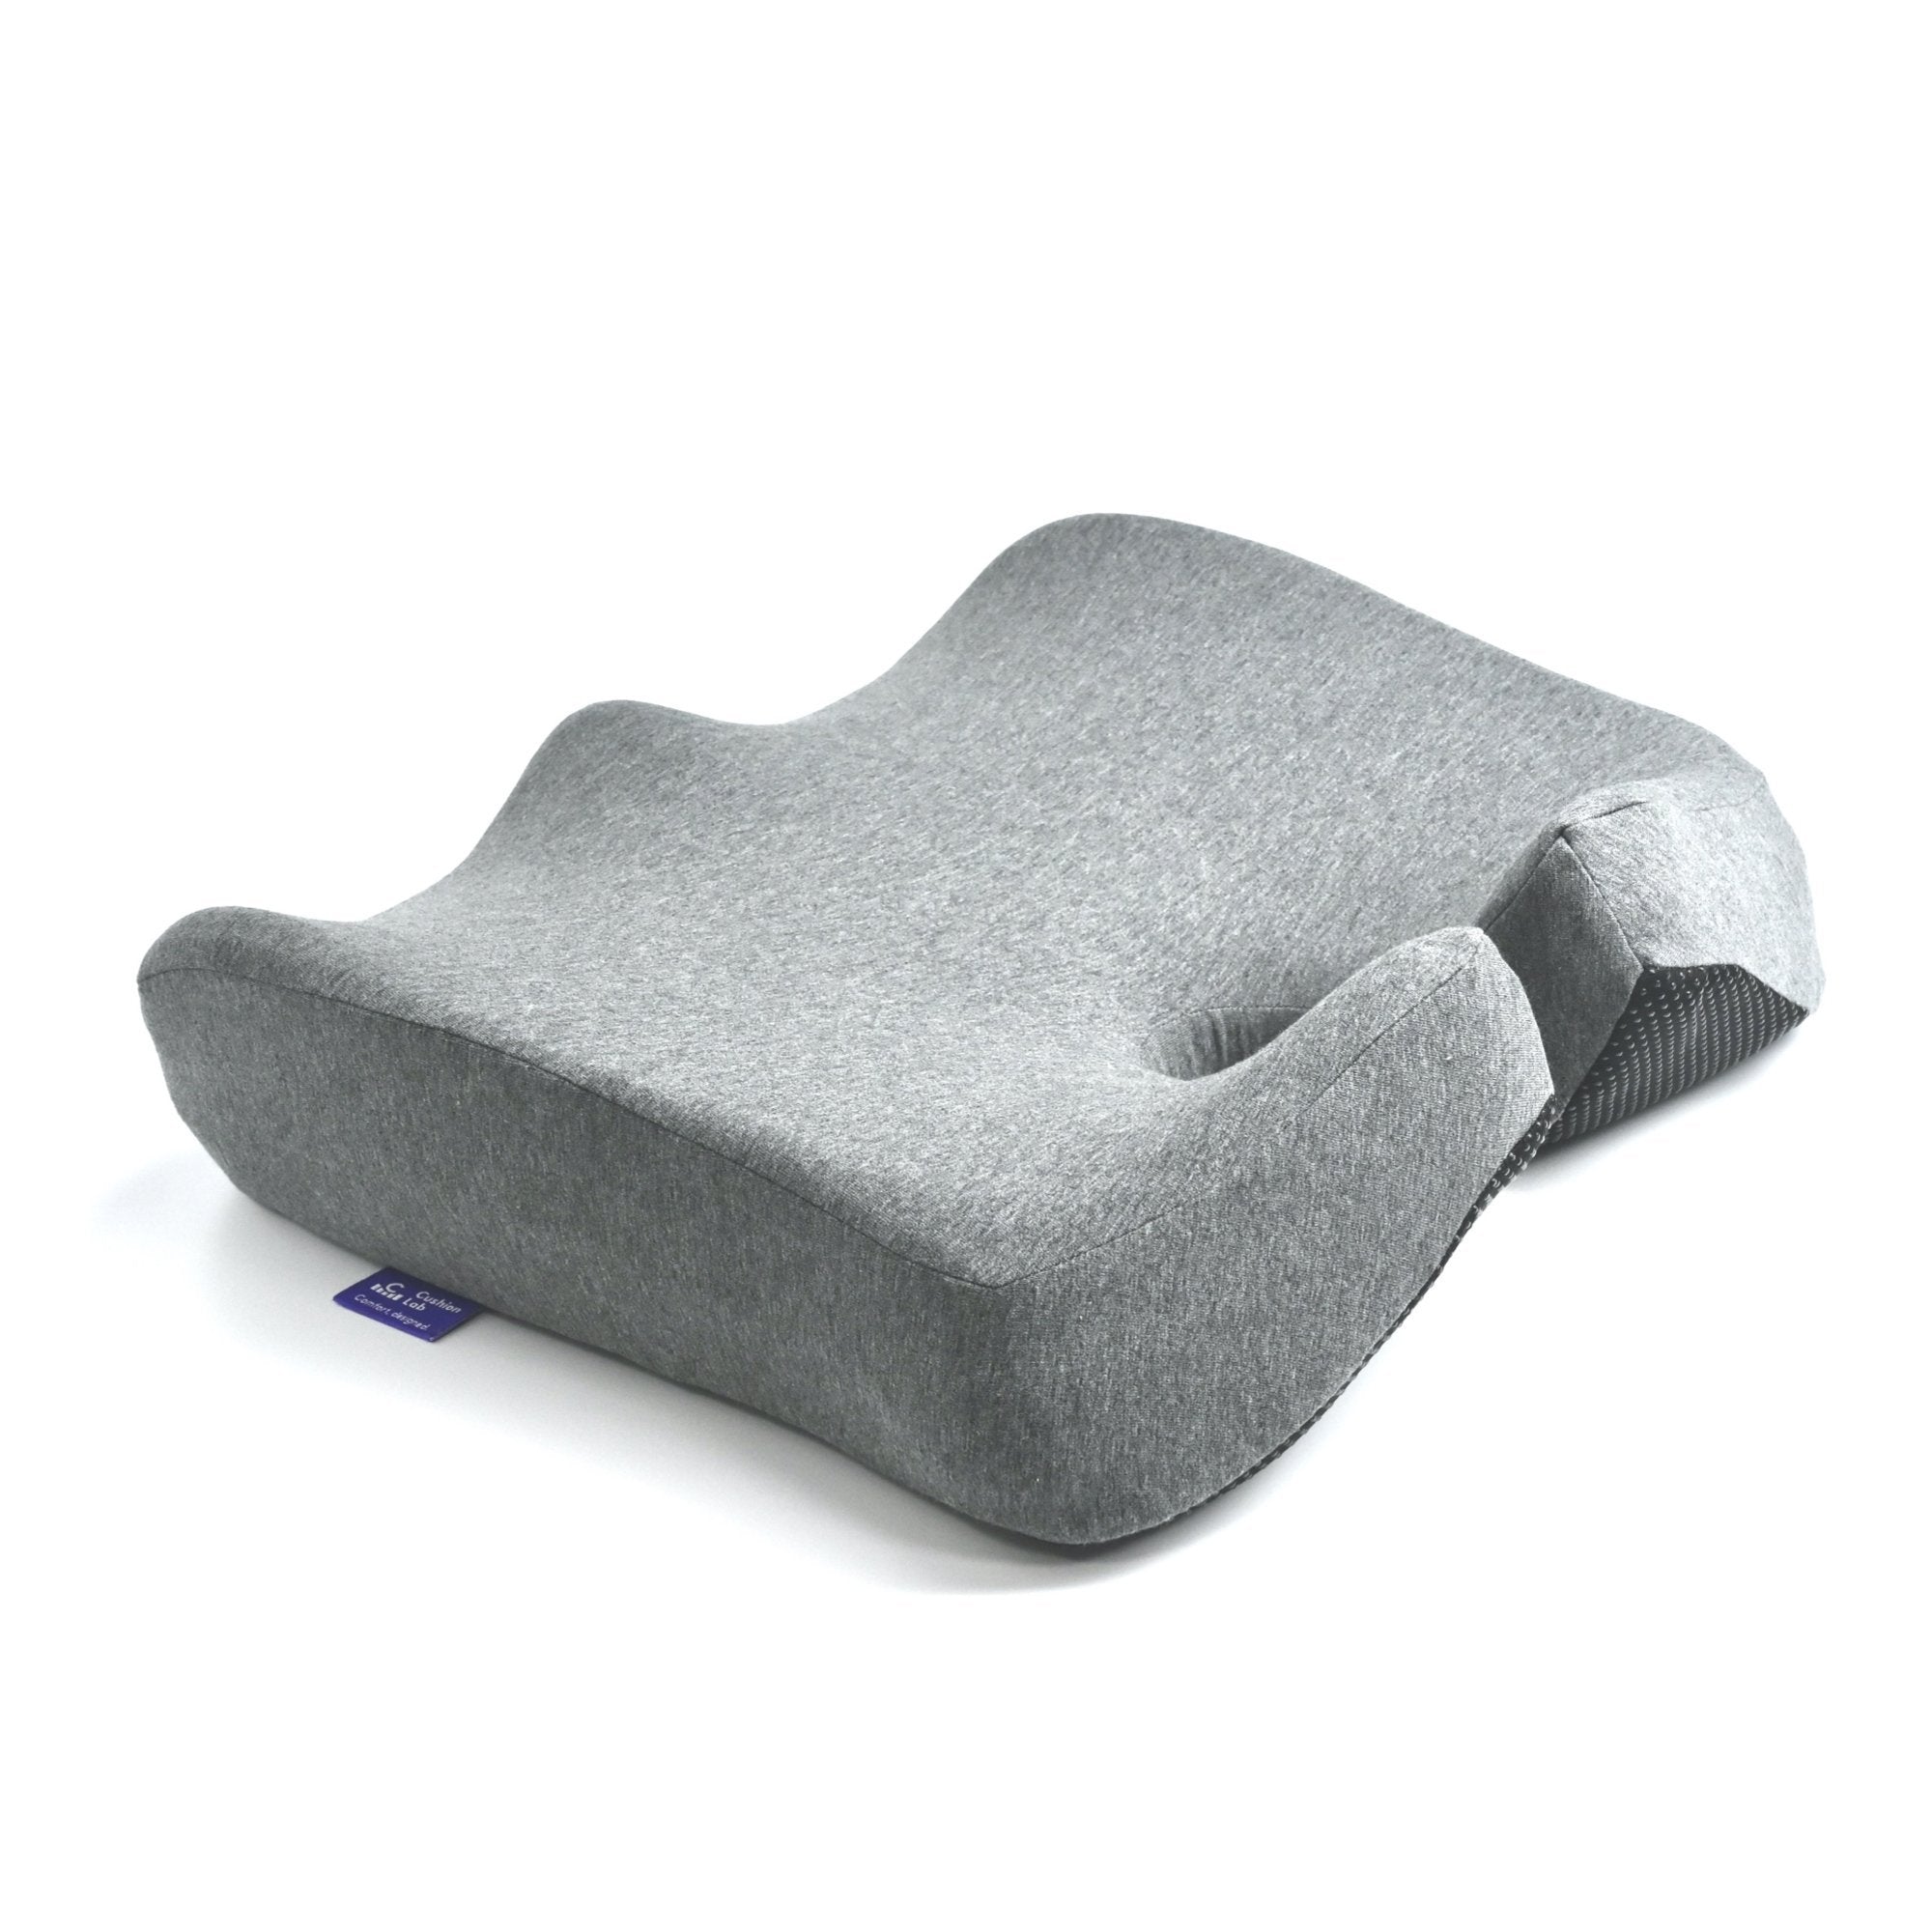 How to Chose a Seat Cushion to Make Working From Home More Comfortable –  Everlasting Comfort